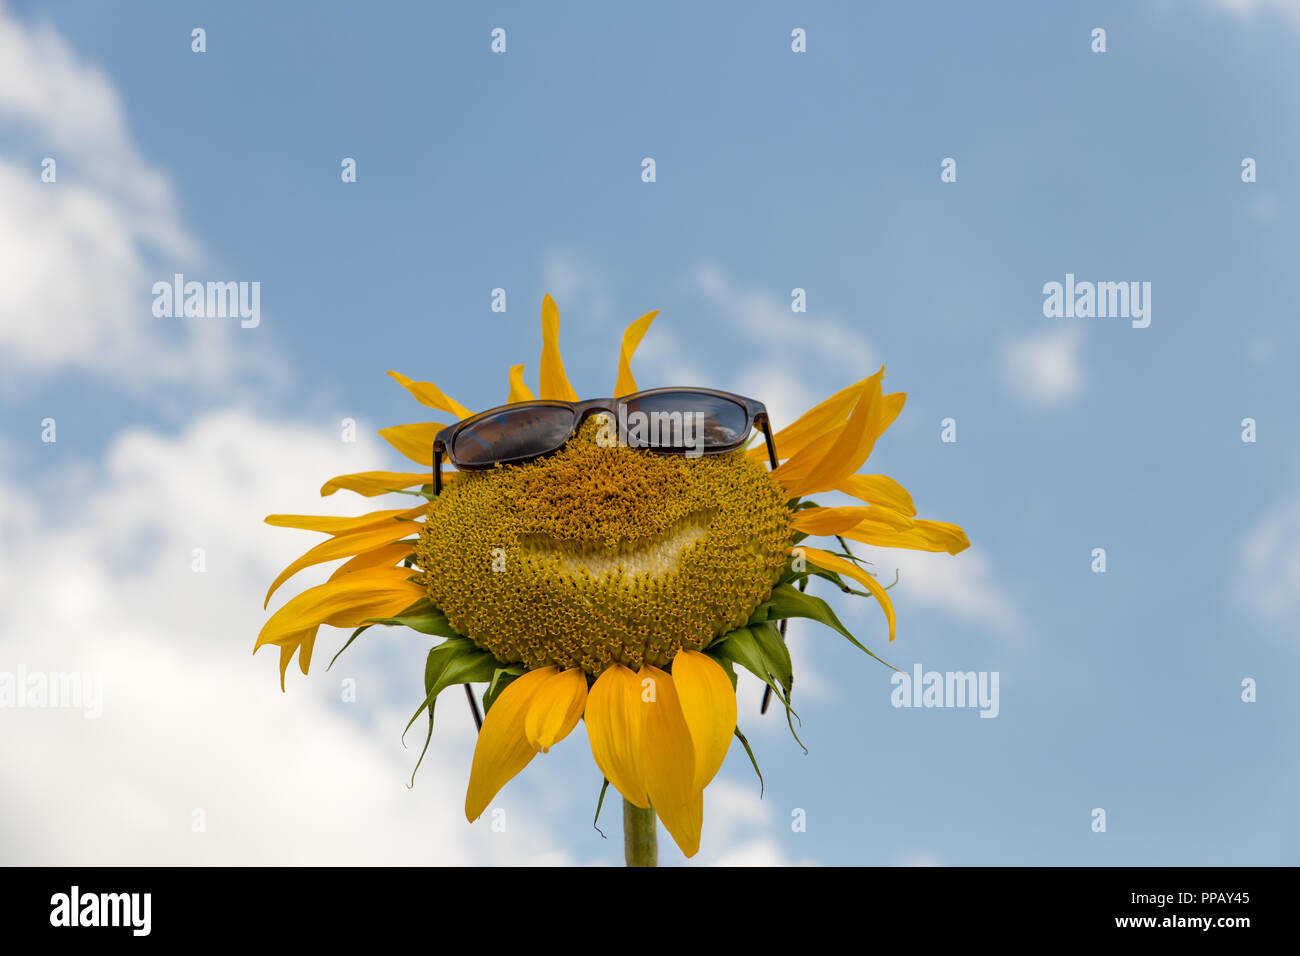 Sunflower with smiled sunglasses blue sky background. Stock Photo